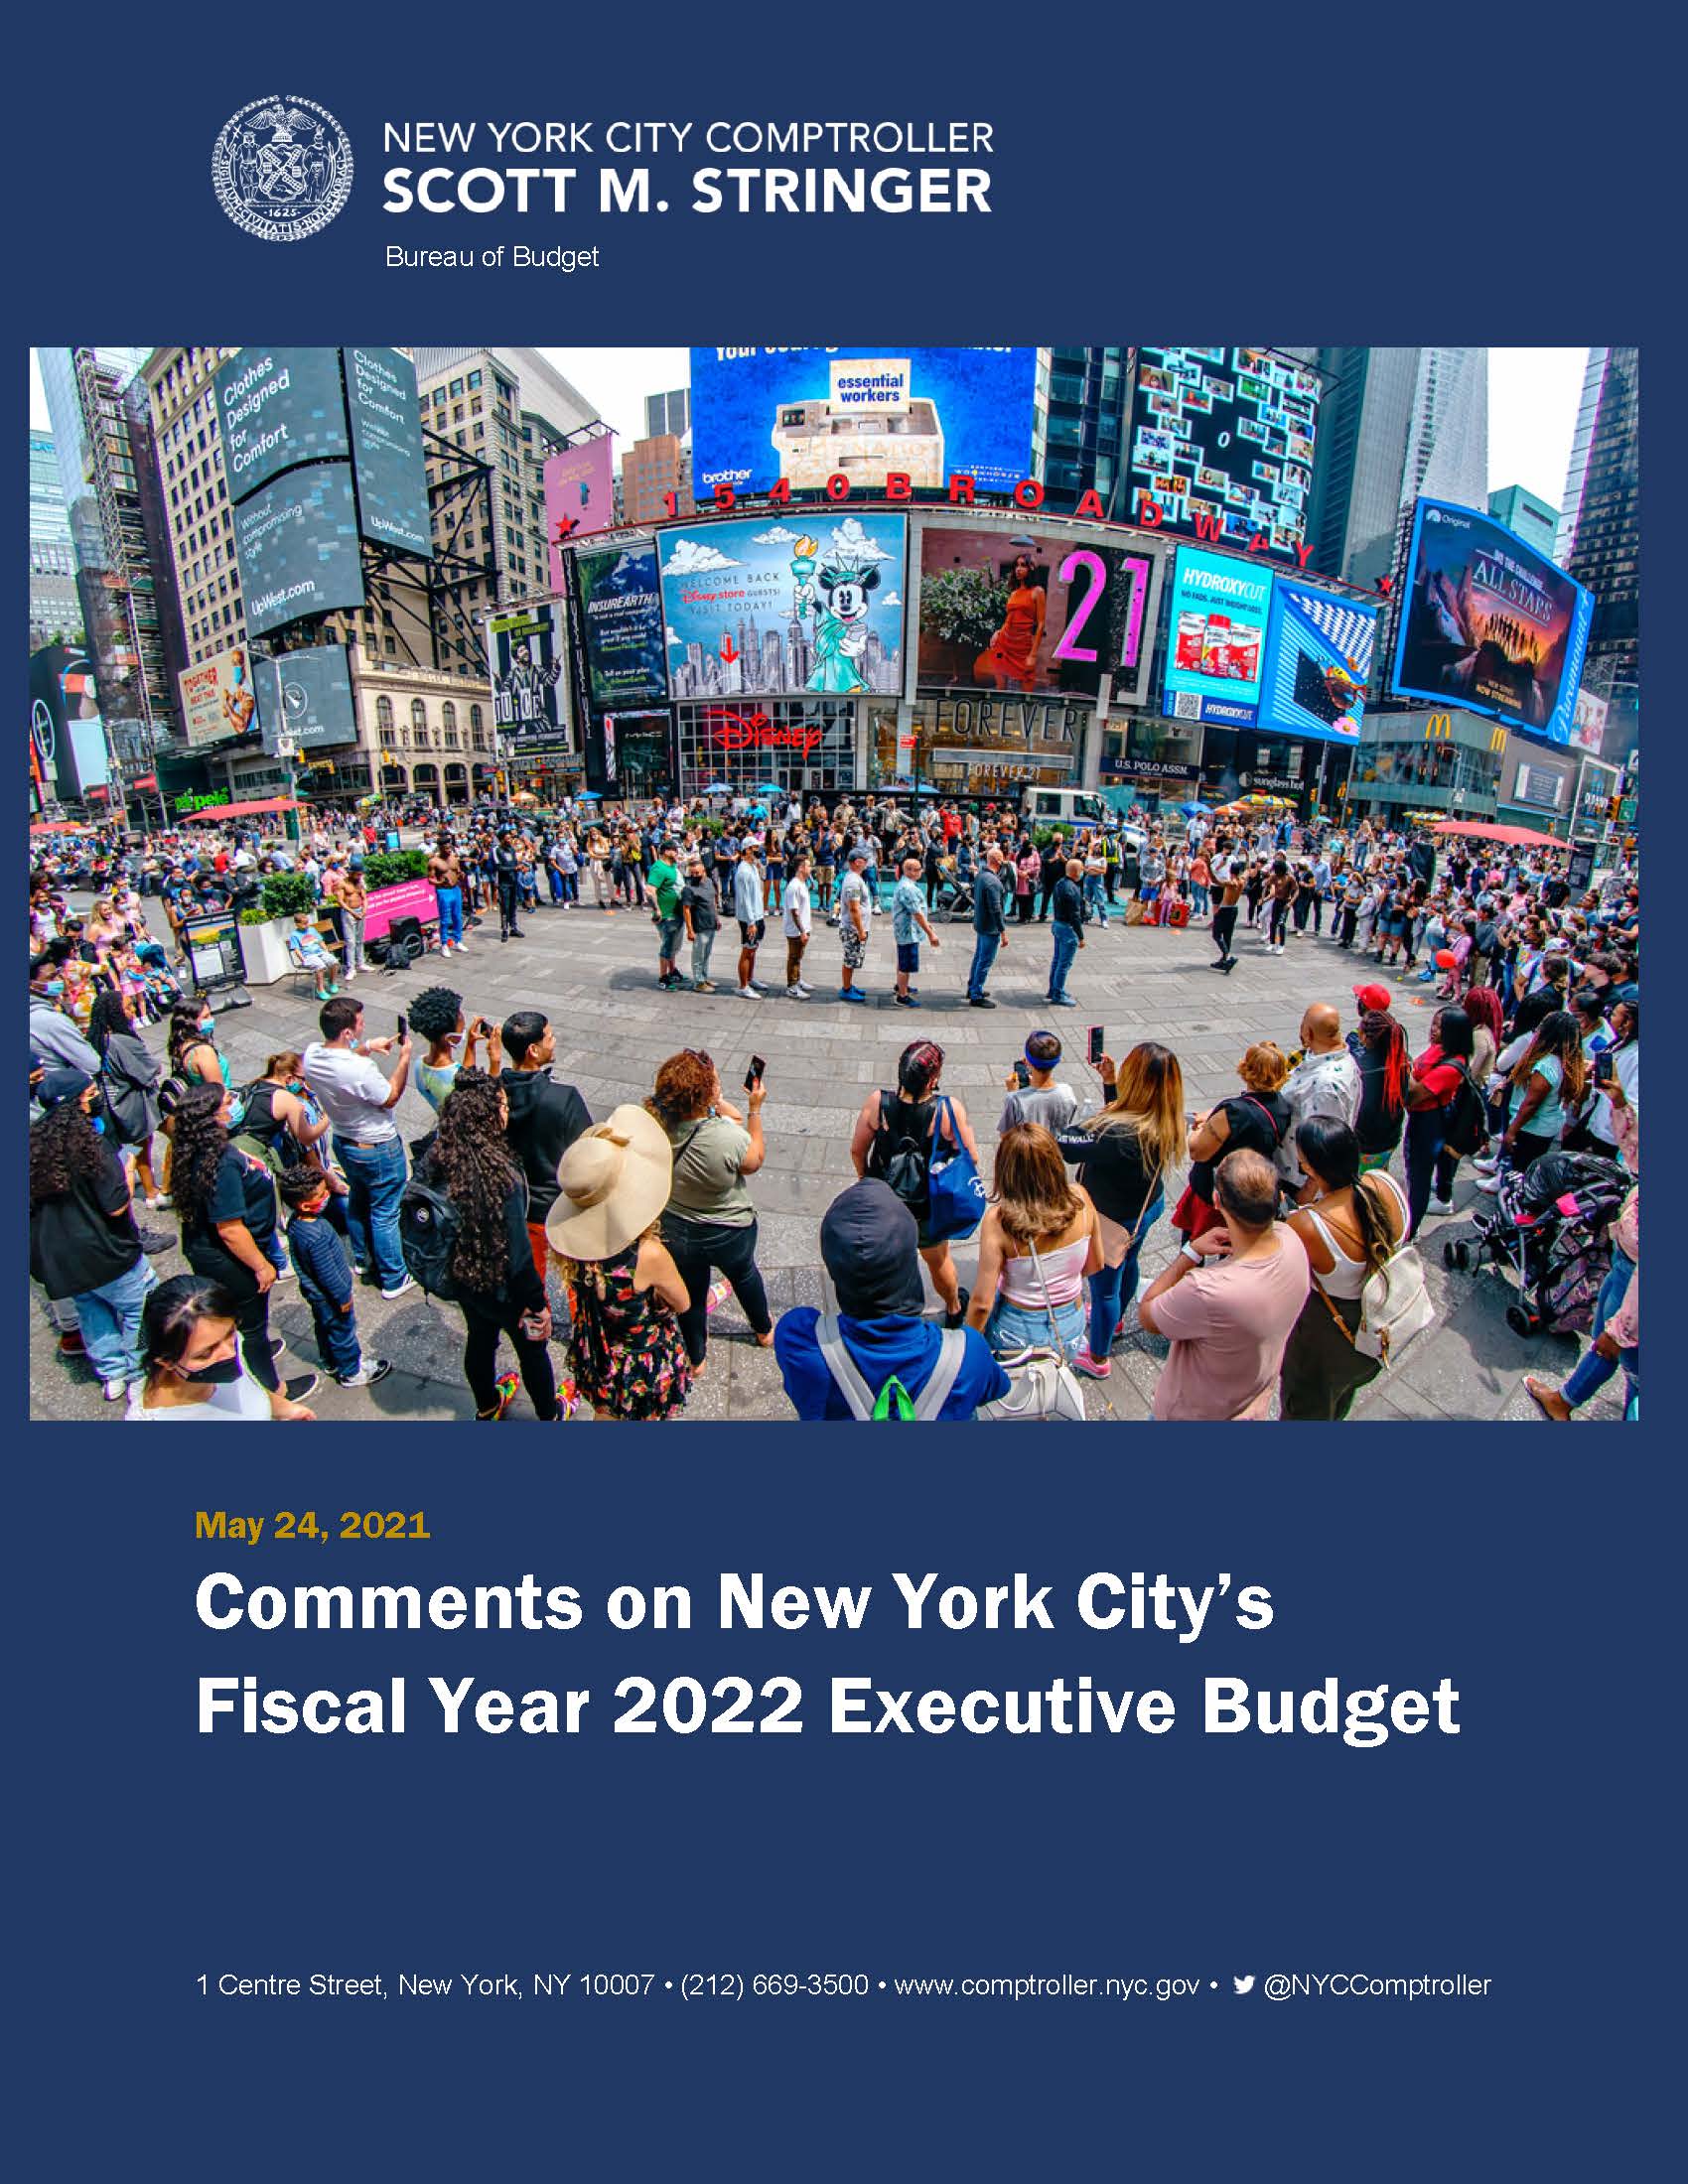 Comments on New York City's Fiscal Year 2022 Executive Budget